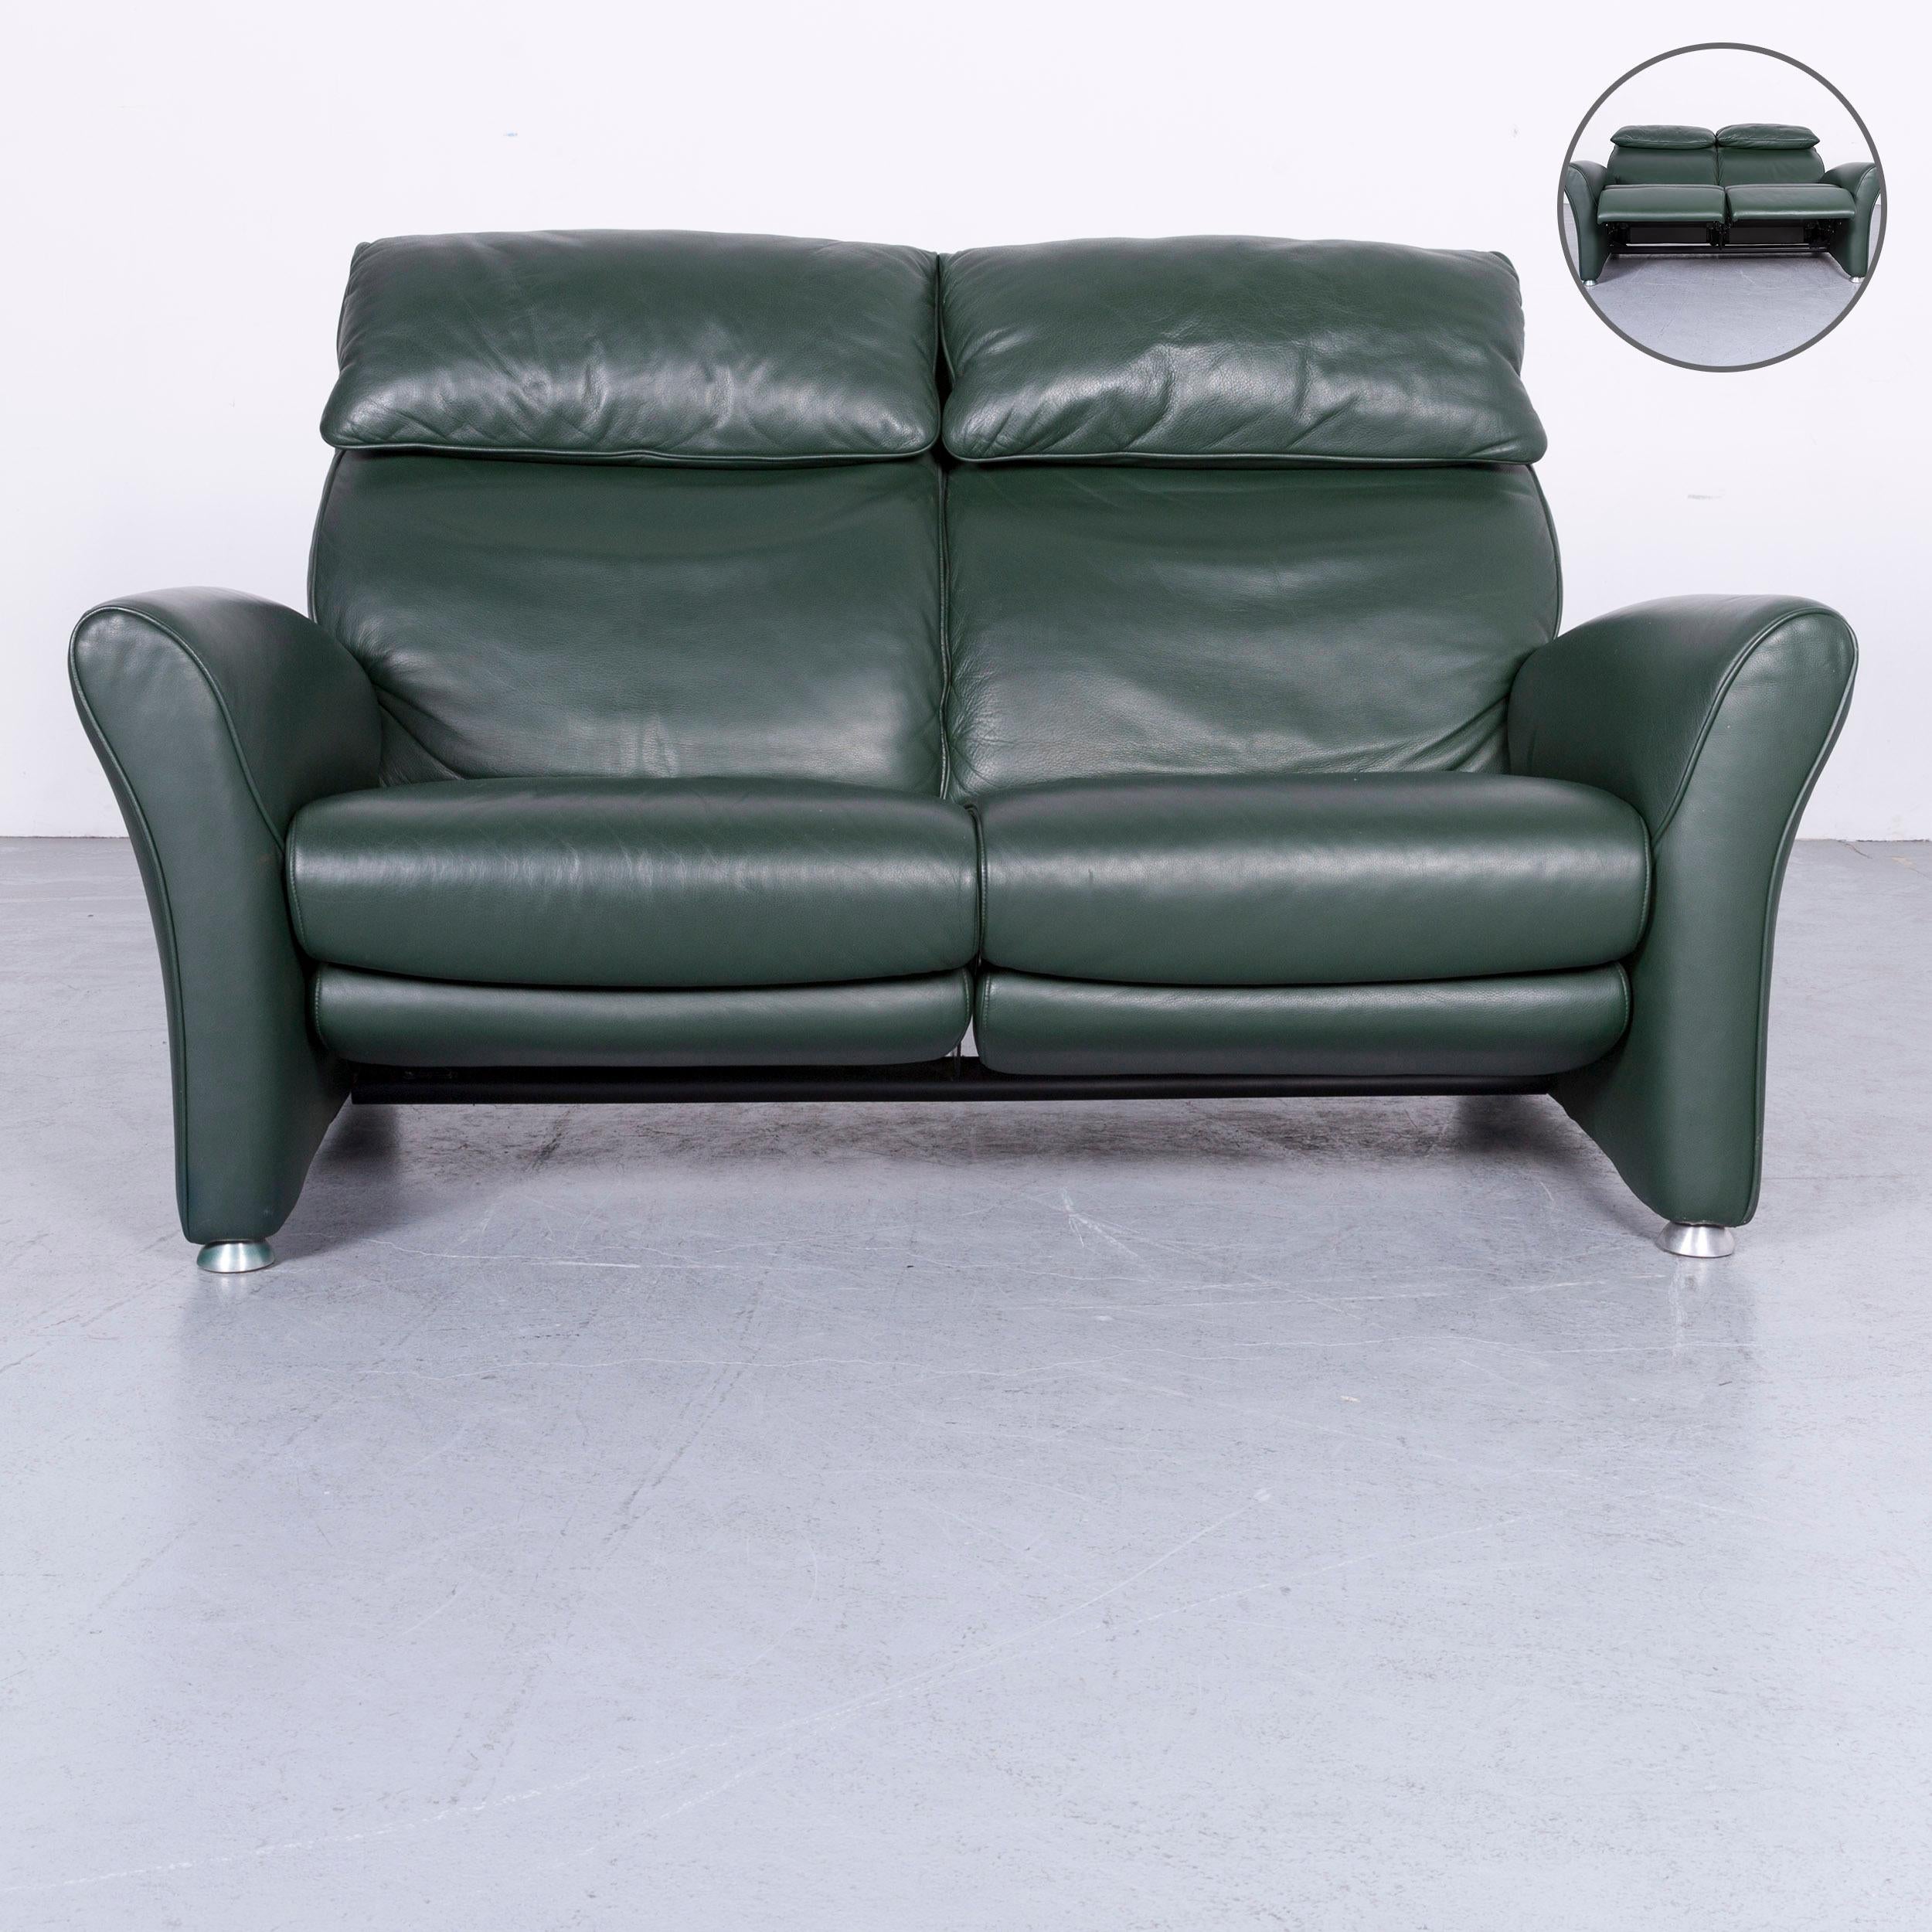 We bring to you a Musterring designer leather sofa armchair set green two-seat couch.

























